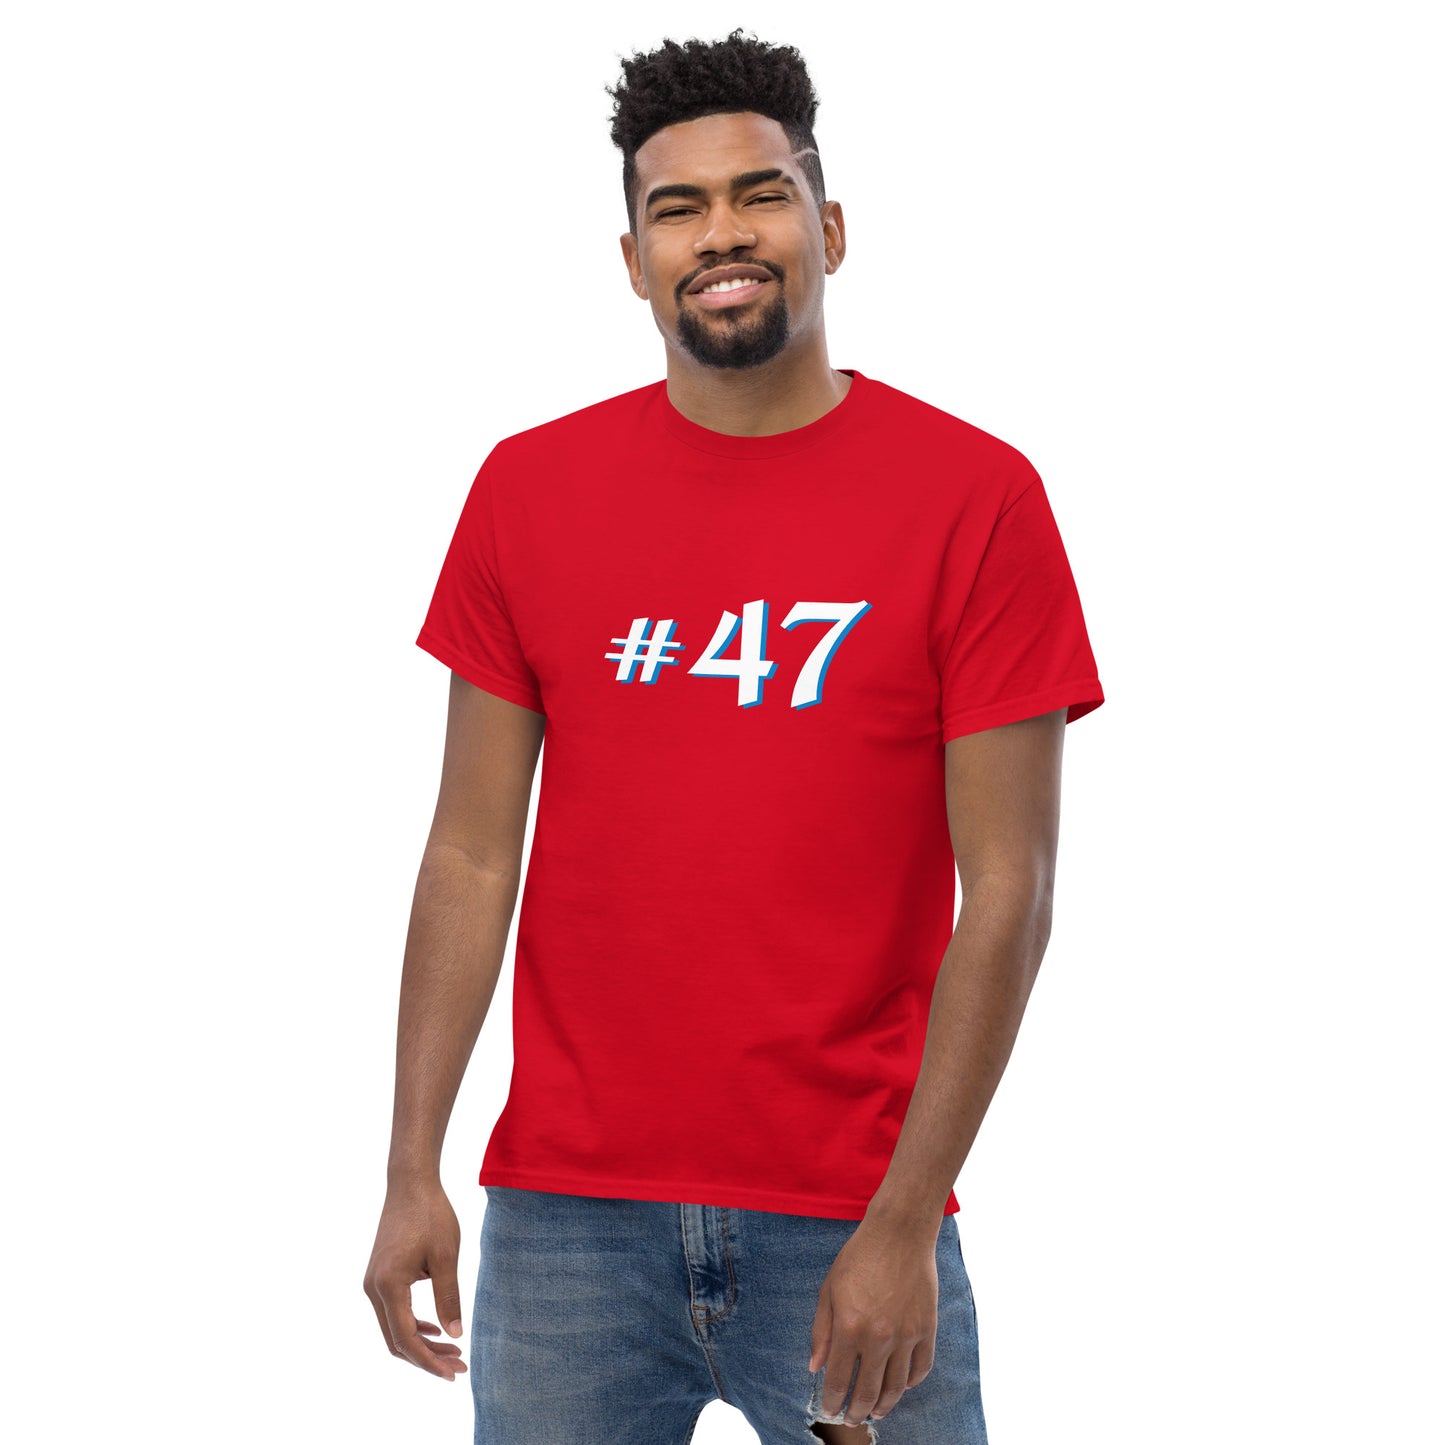 Men's #47 "Style A" Classic Tee